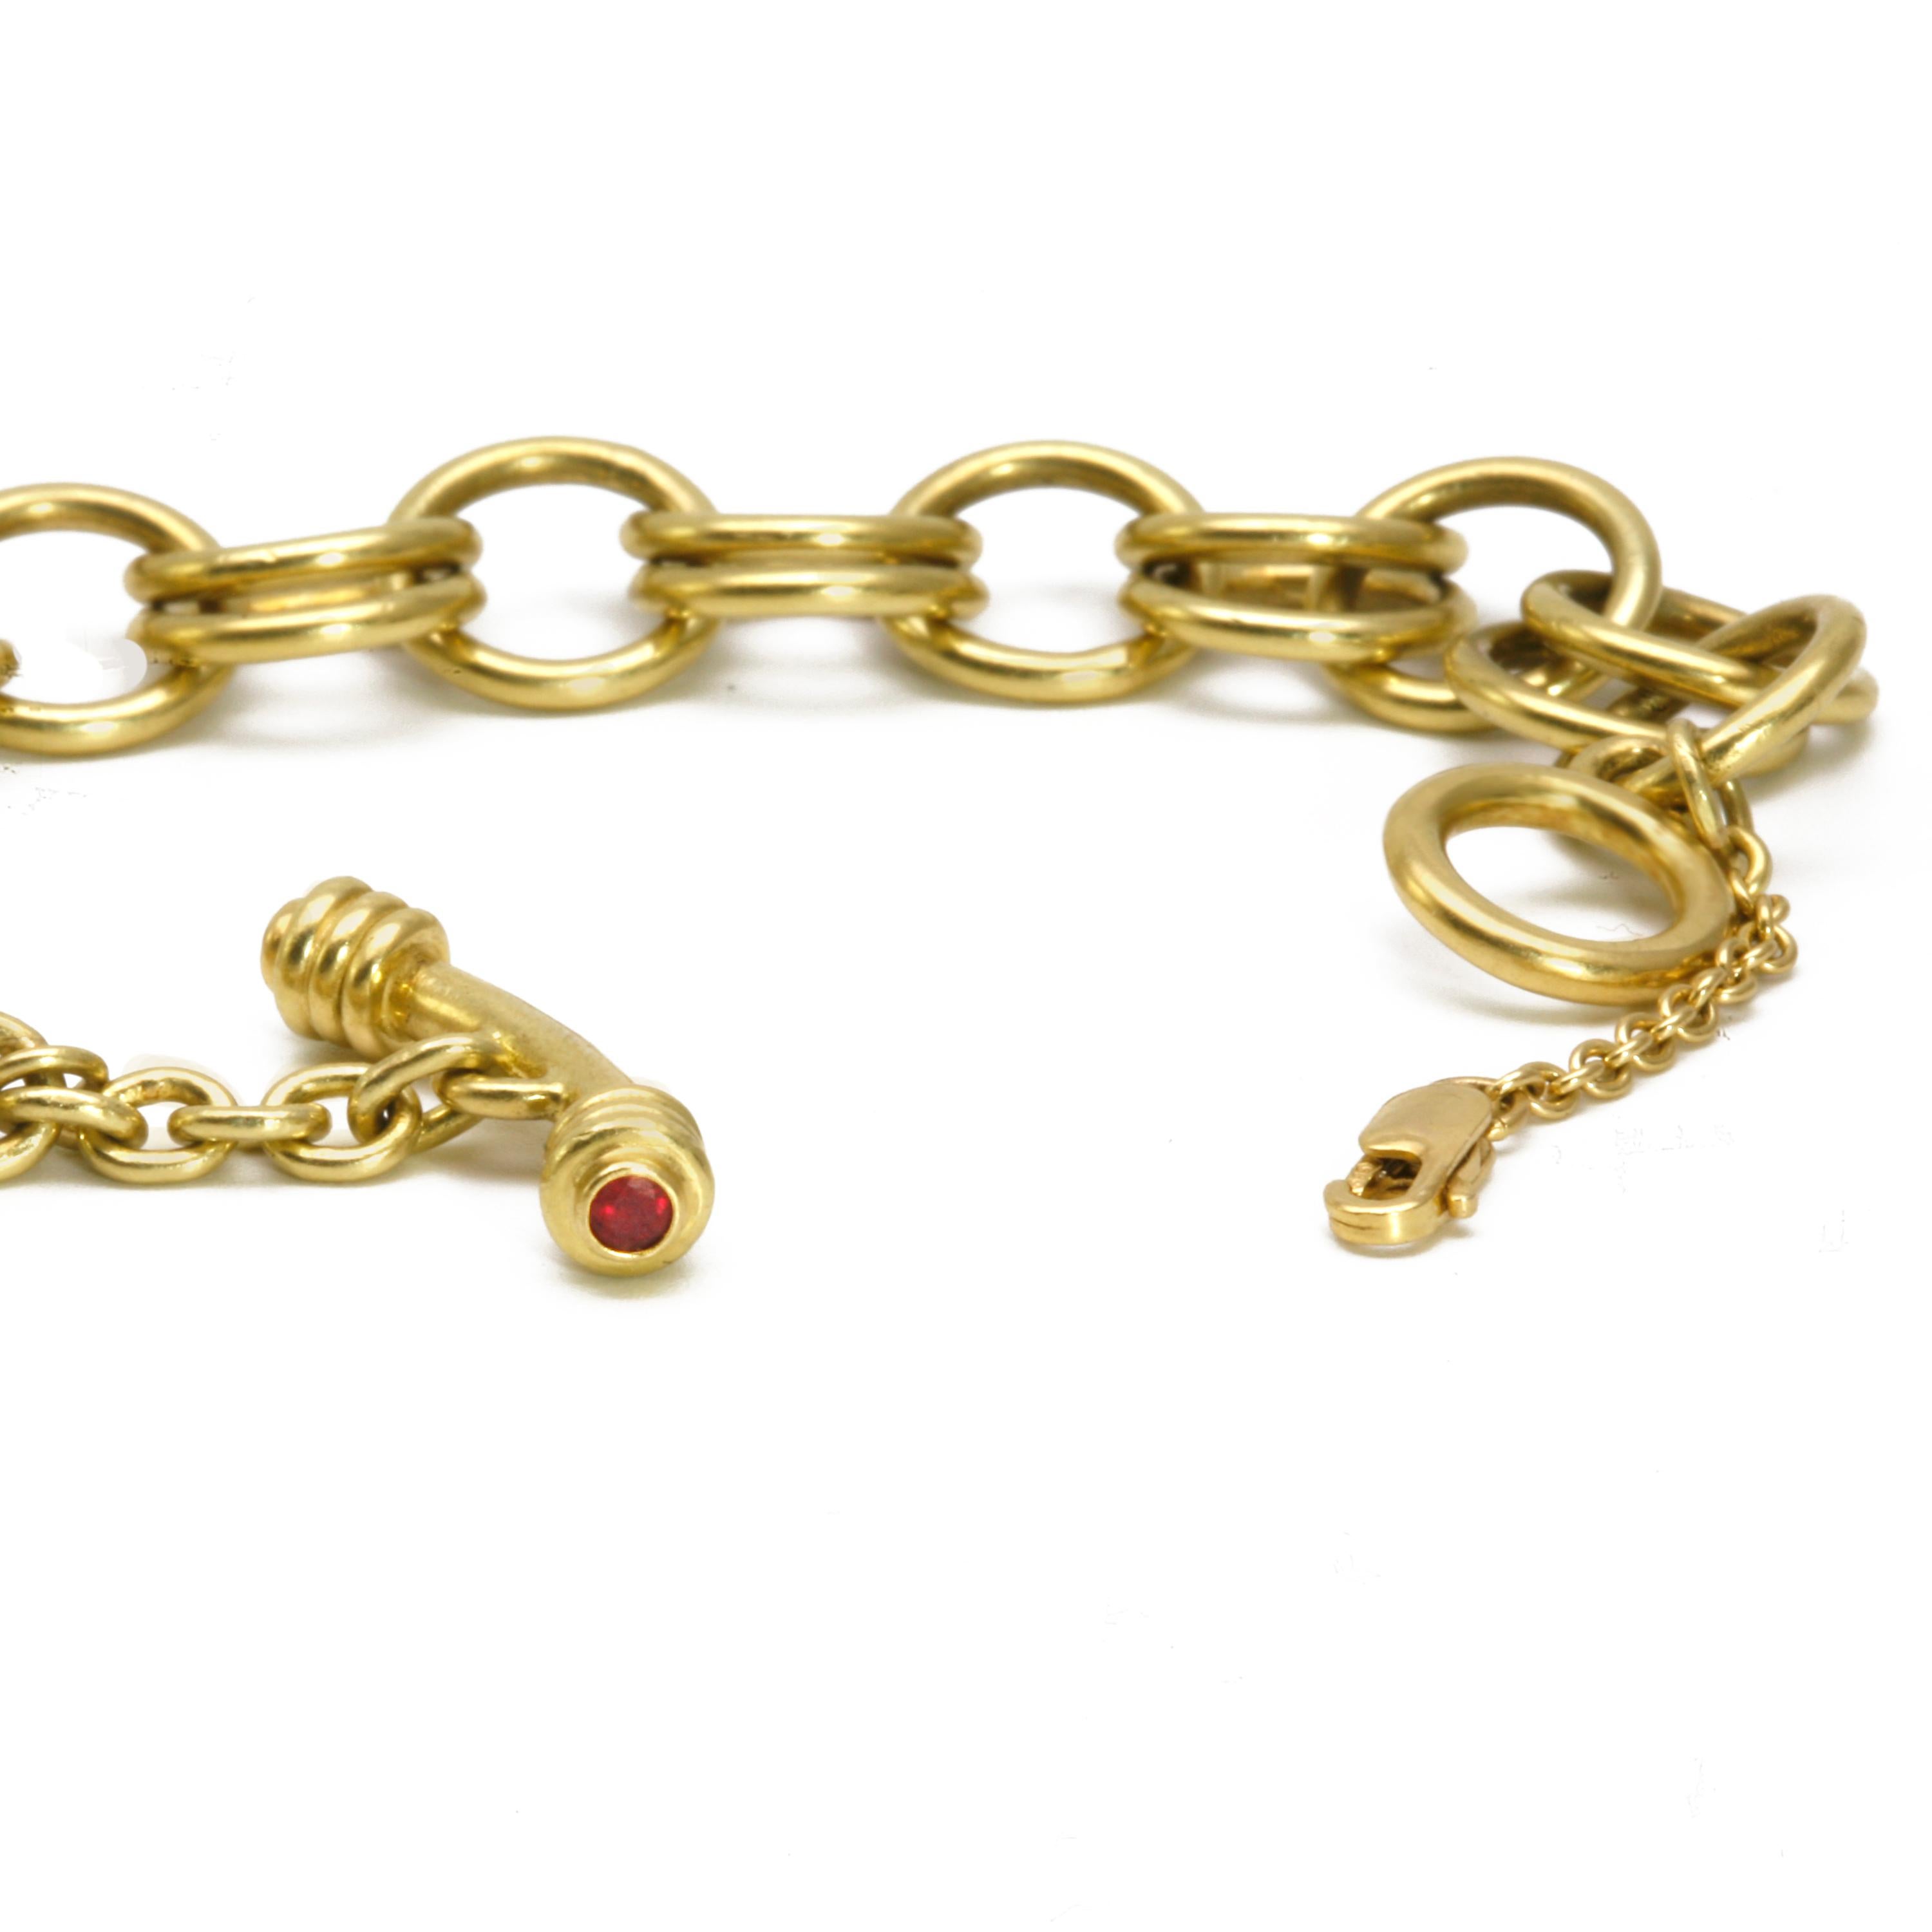 Diana Kim England Handmade Charm Chain in 18 Karat Gold with Ruby Toggle For Sale 3